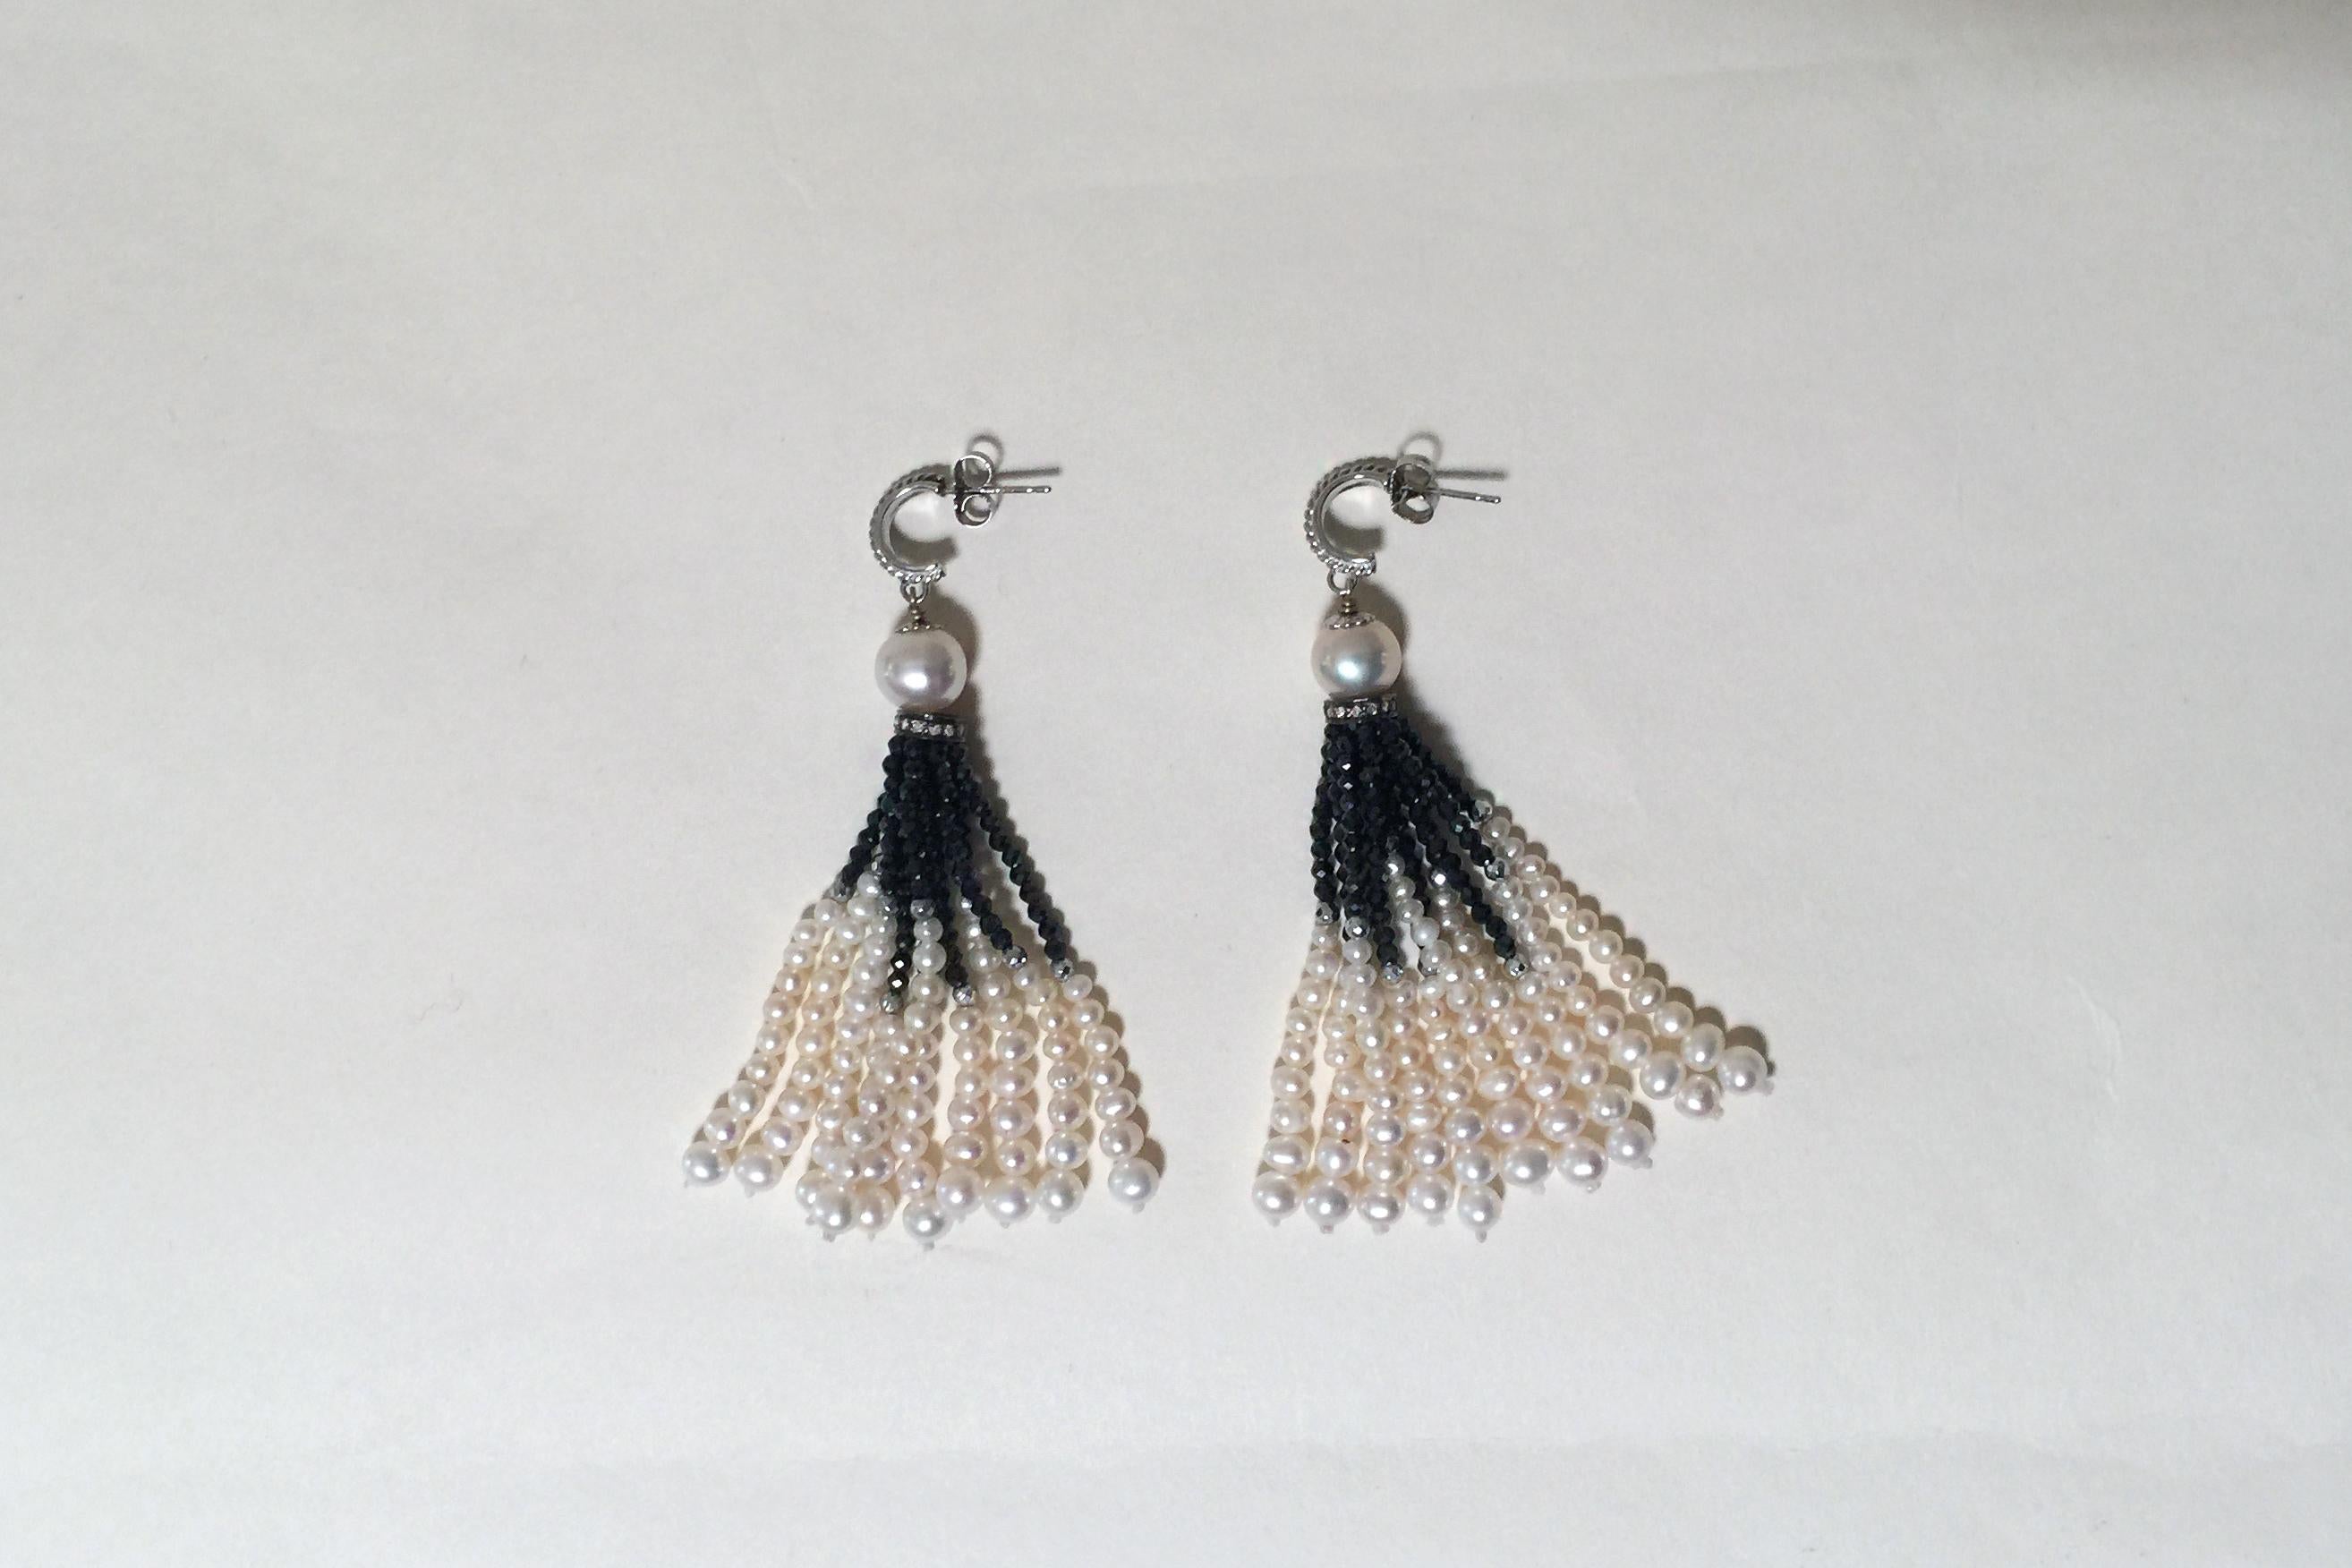 These black spinel and white pearl tassel earrings with 14k white gold stud and sterling silver findings are elegant. The graduated strands of the tassel start with glittering black spinel and finish with glowing white pearls. In between the spinel